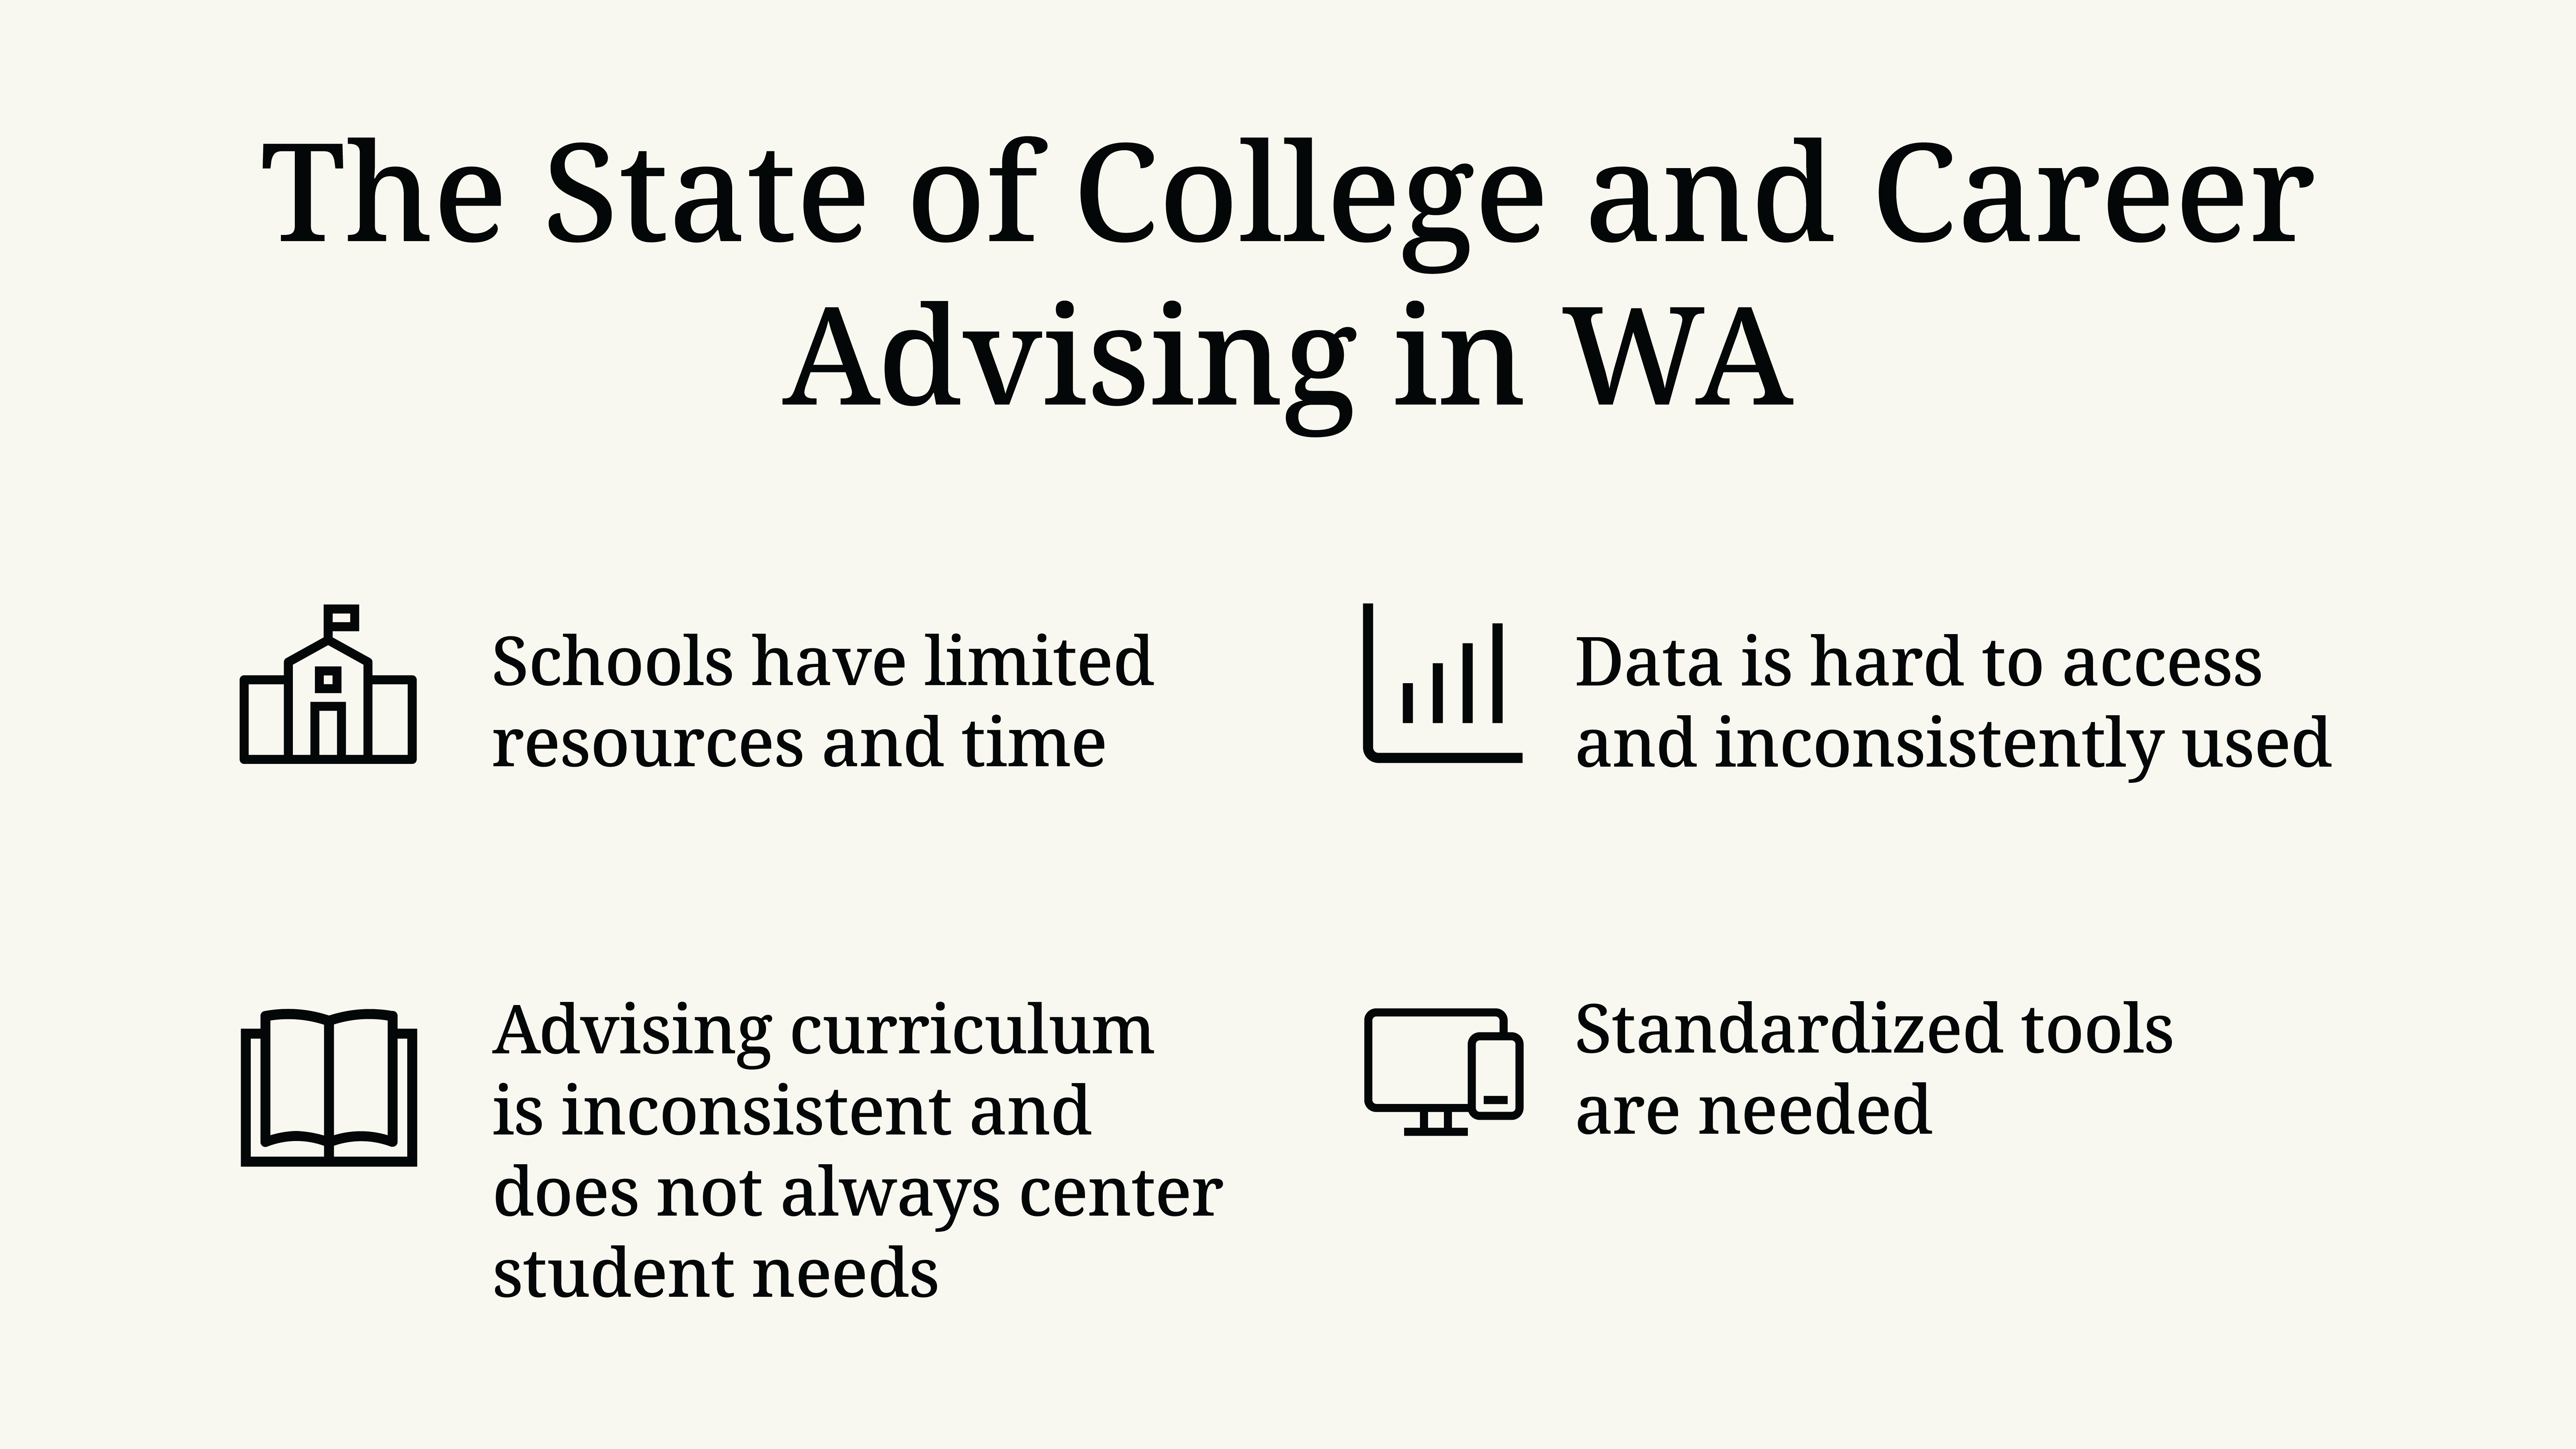 A graphic image of The State of College and Career Advising in WA